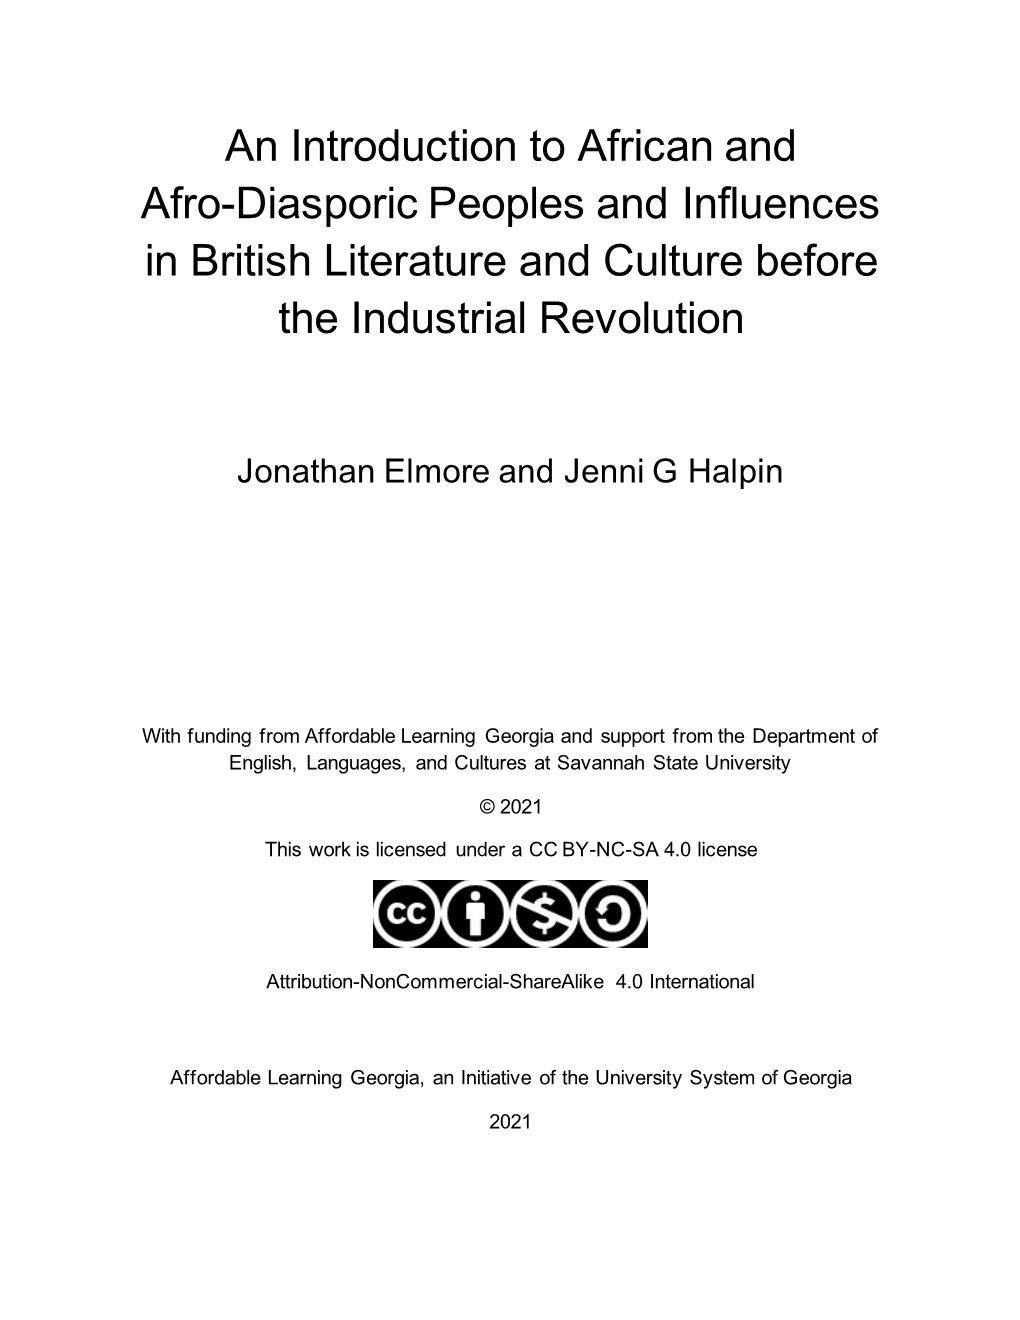 An Introduction to African and Afro-Diasporic Peoples and Influences in British Literature and Culture Before the Industrial Revolution